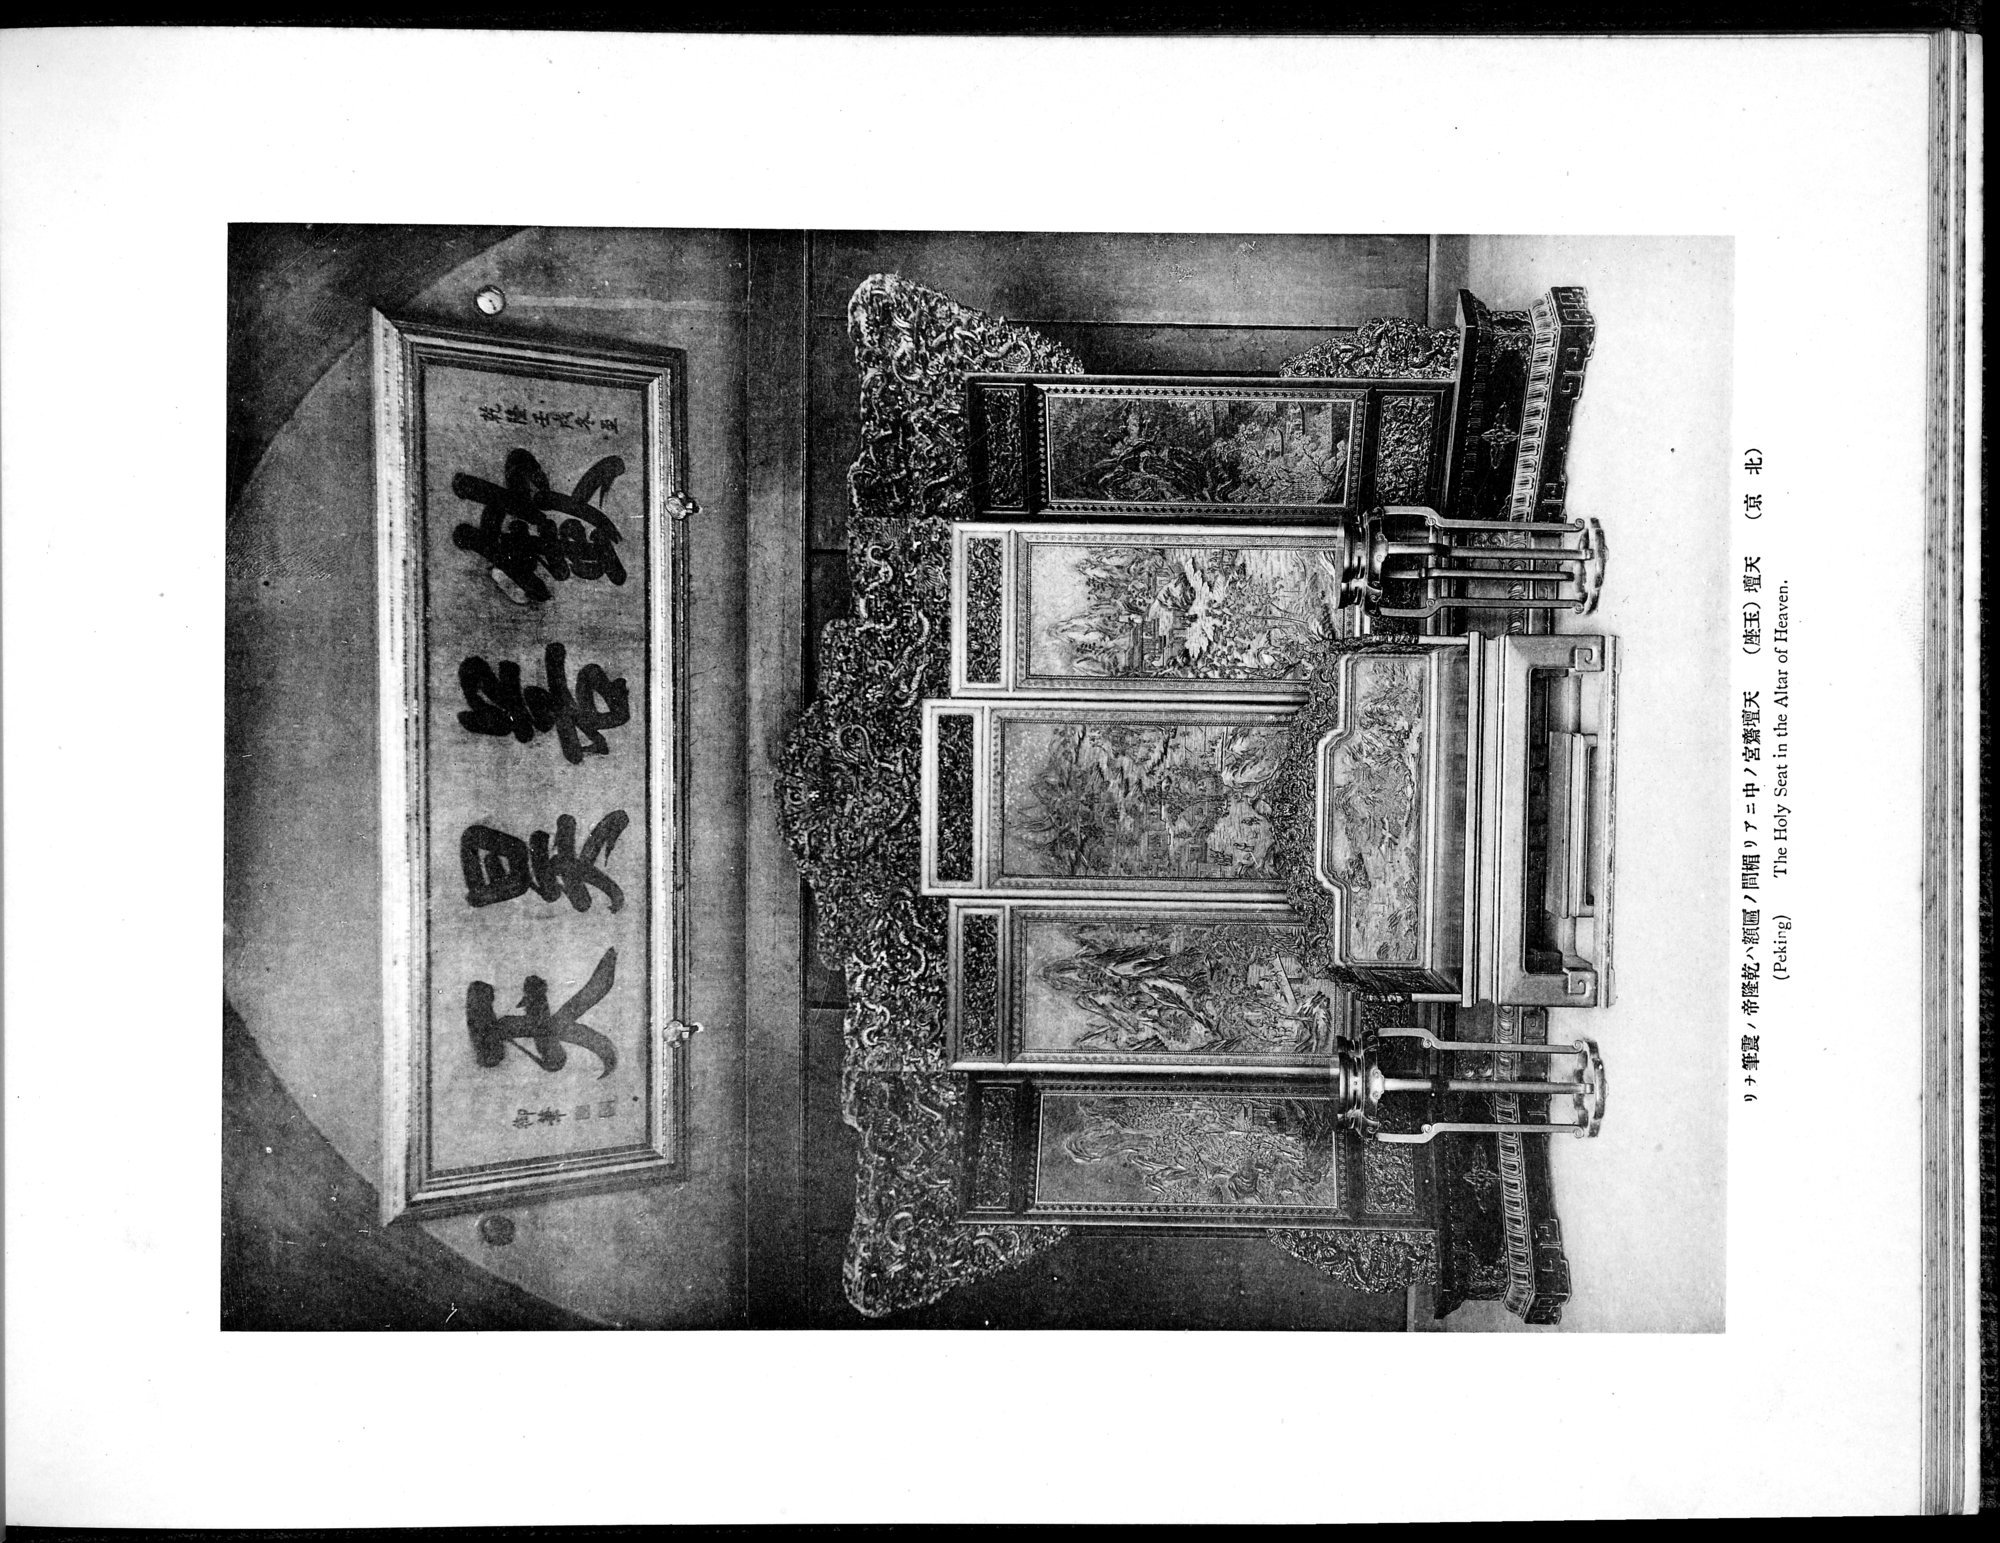 Views and Custom of North China : vol.1 / Page 147 (Grayscale High Resolution Image)